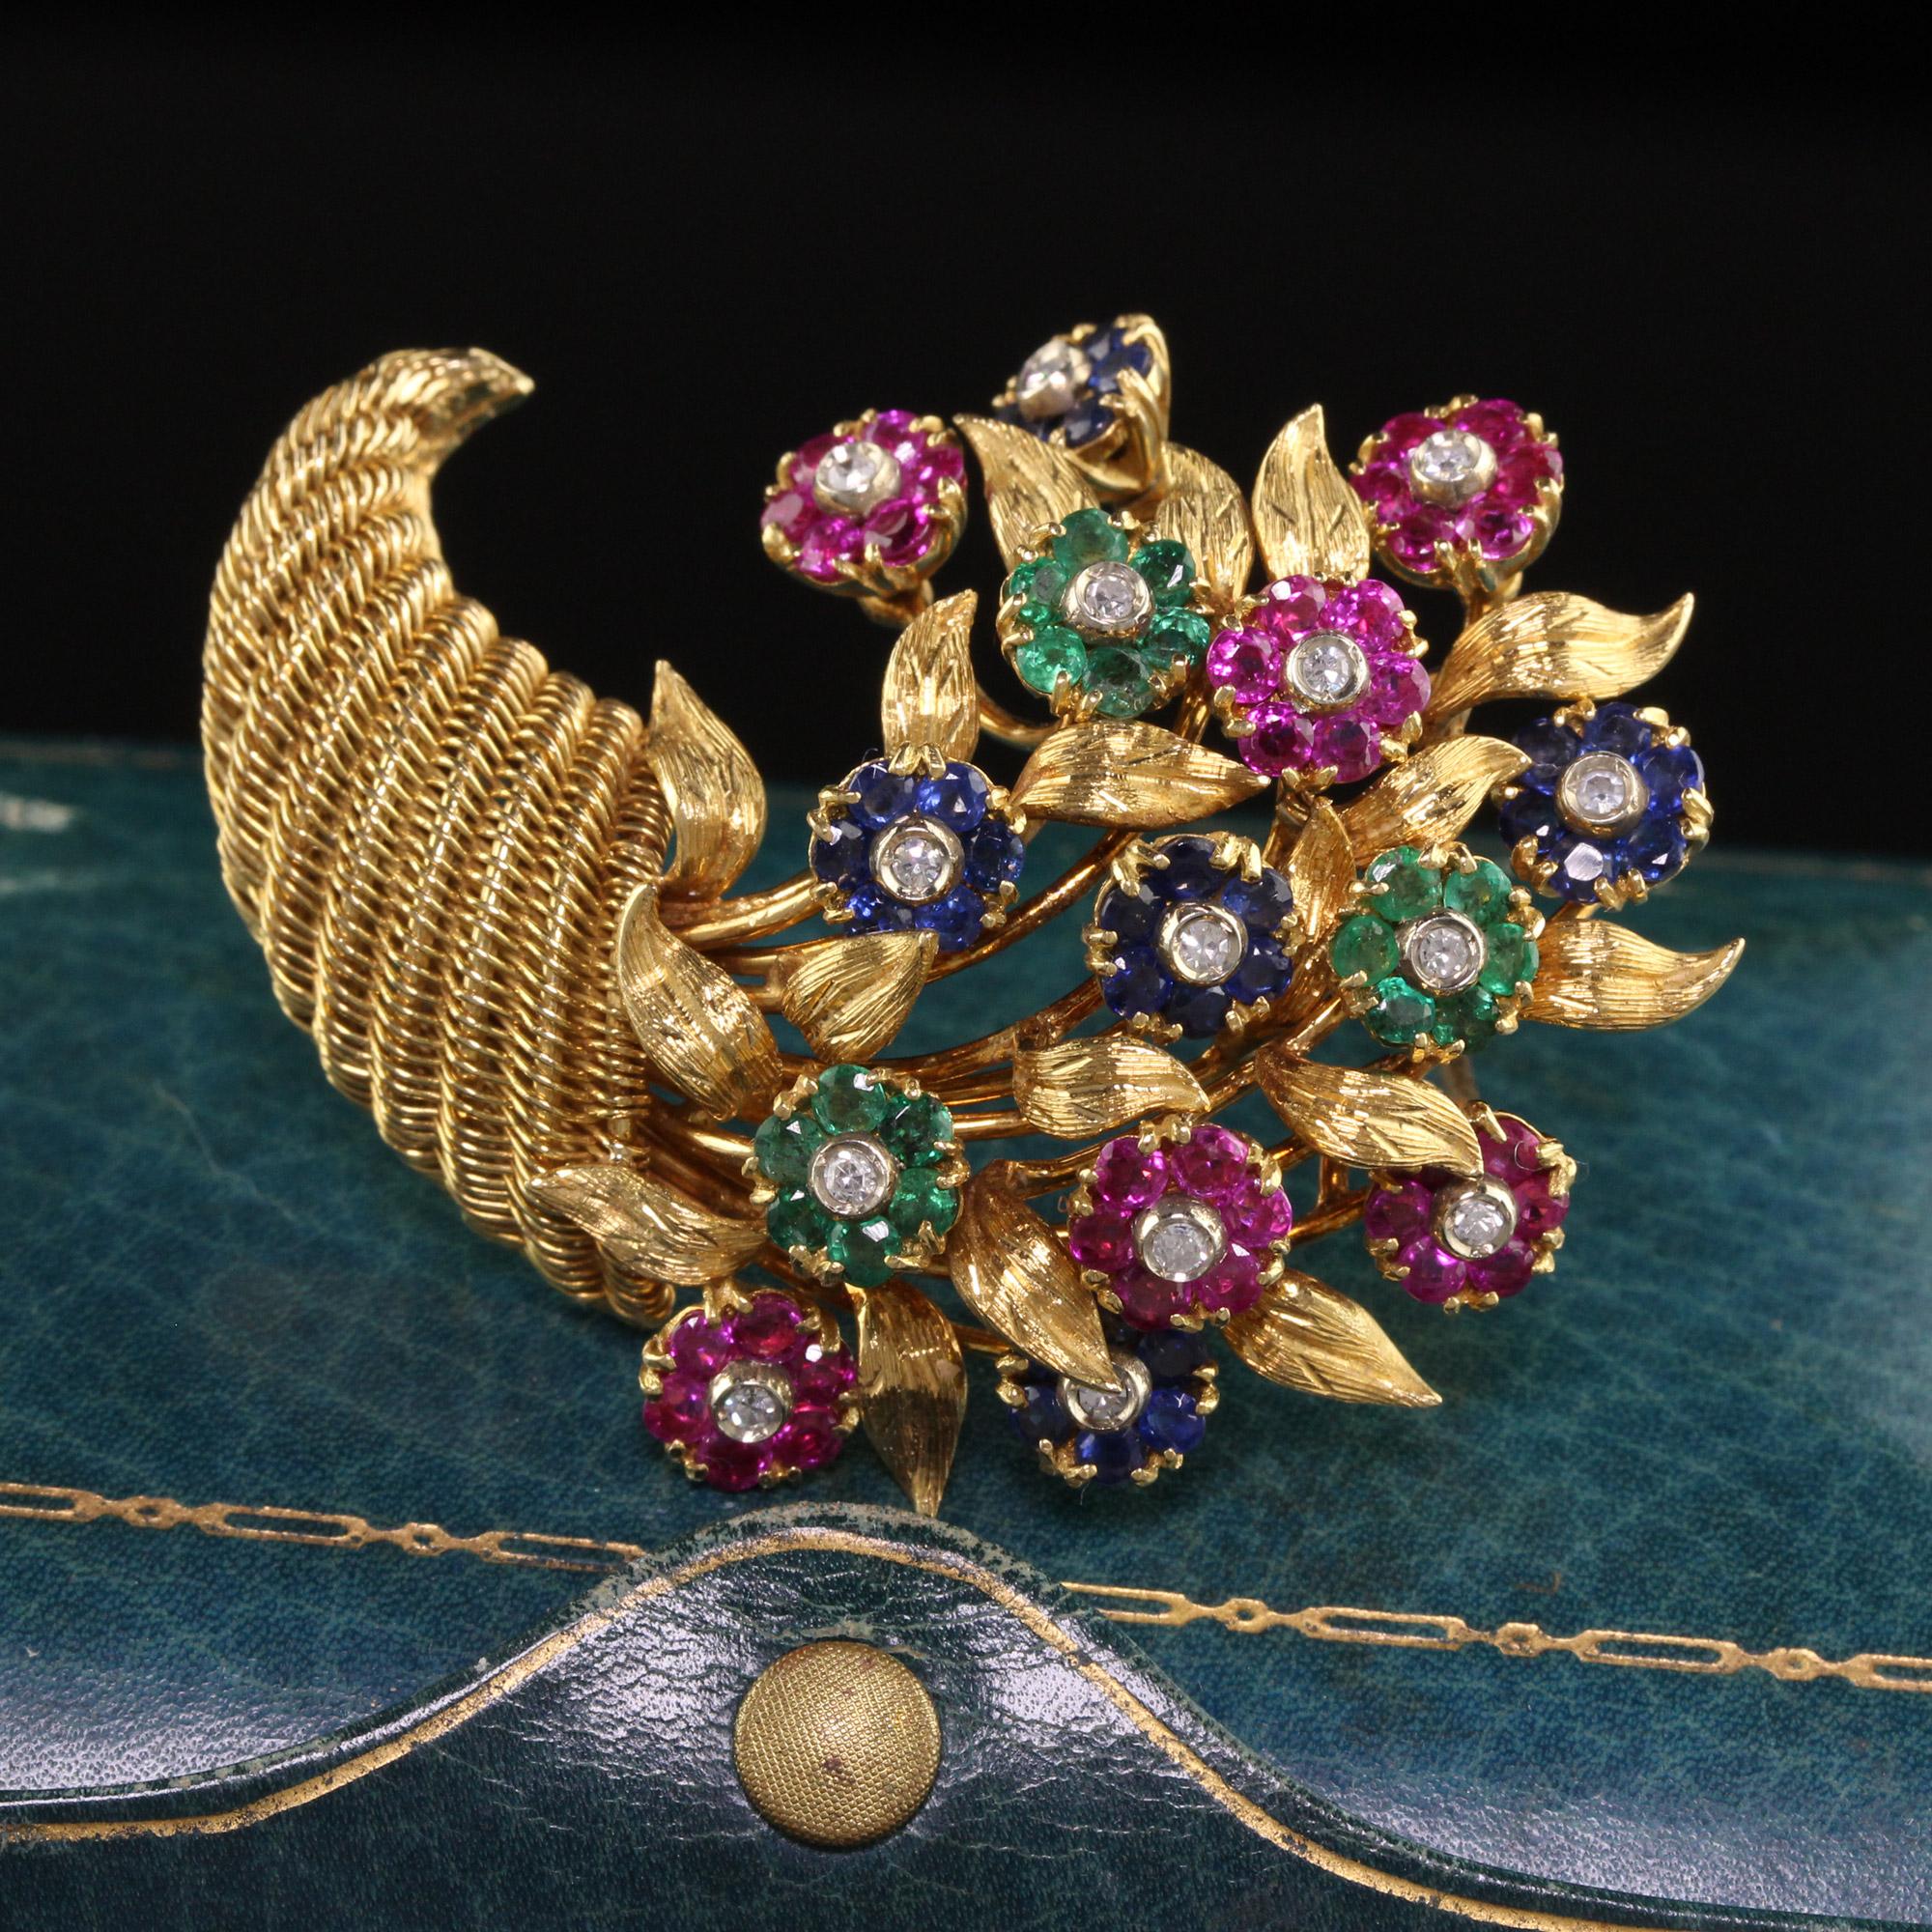 Beautiful Vintage Retro Tiffany and Co 18K Yellow Gold Cornucopia Sapphire Flower Pin. This gorgeous pin is crafted in 18k yellow gold. The pin has natural sapphires, rubies, emeralds, and diamonds set in flower petals that articulate when touched